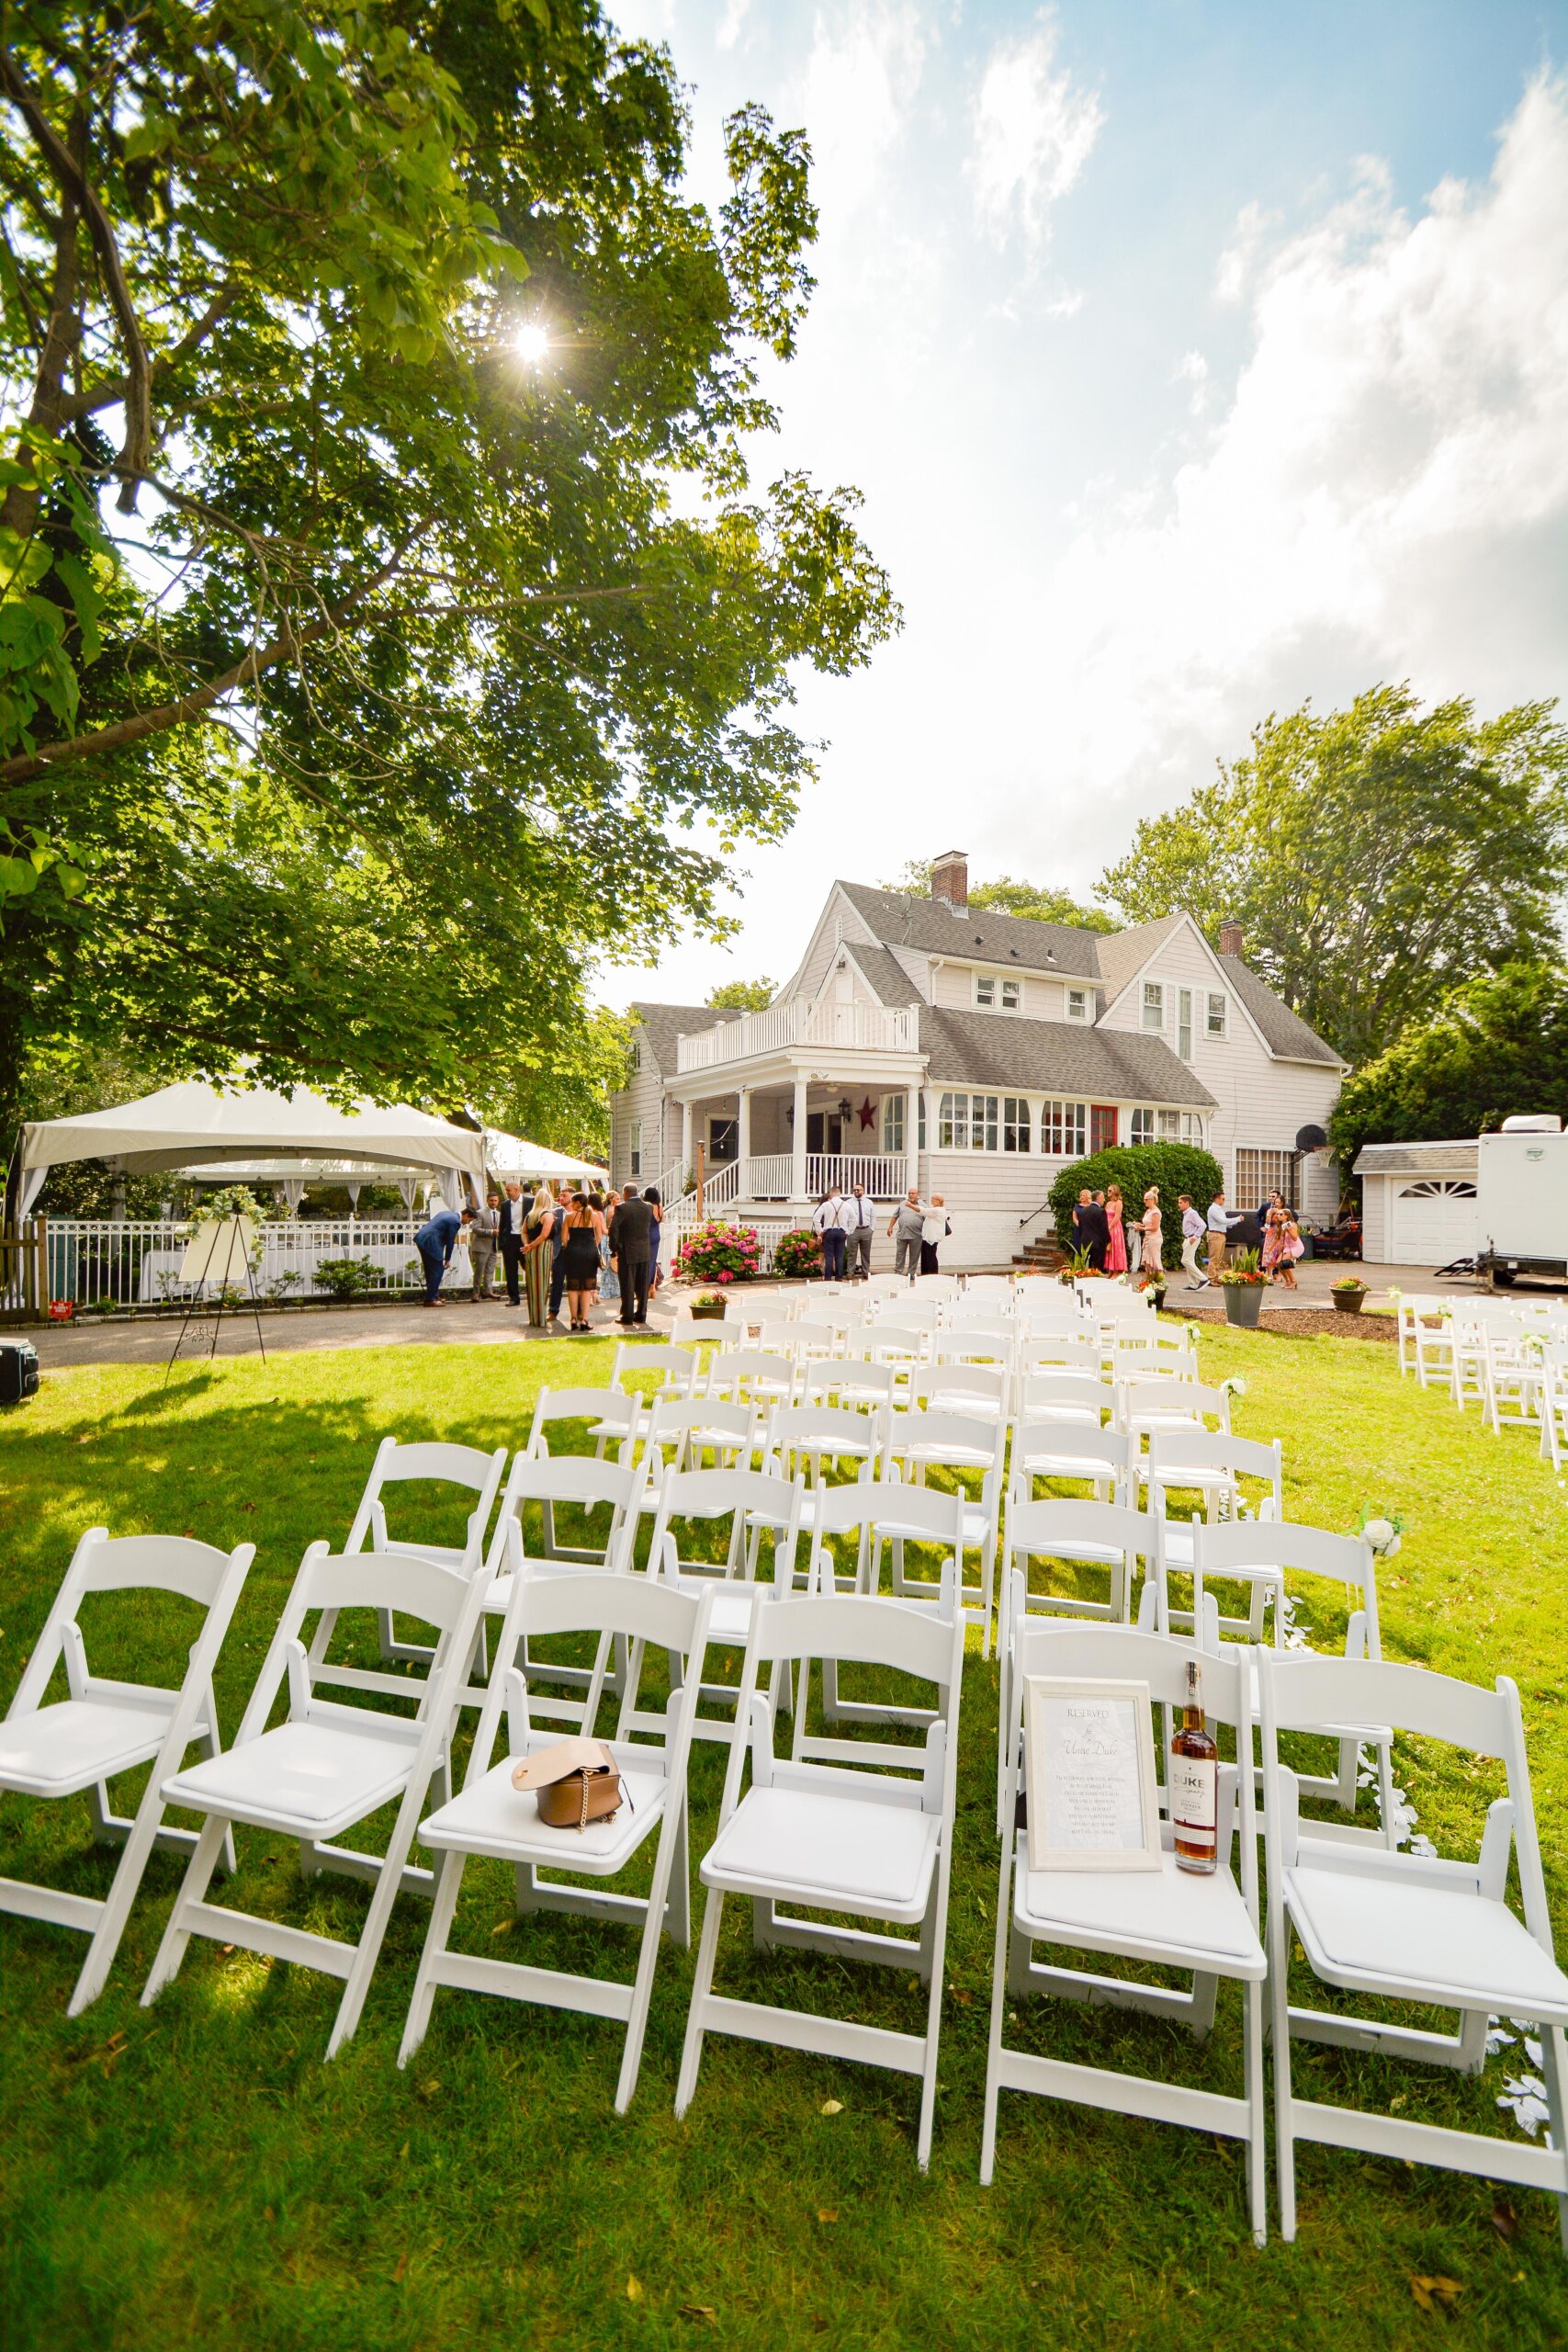 Preferred Events and National Event Connection organize events without tents as well, both outdoor and indoor.